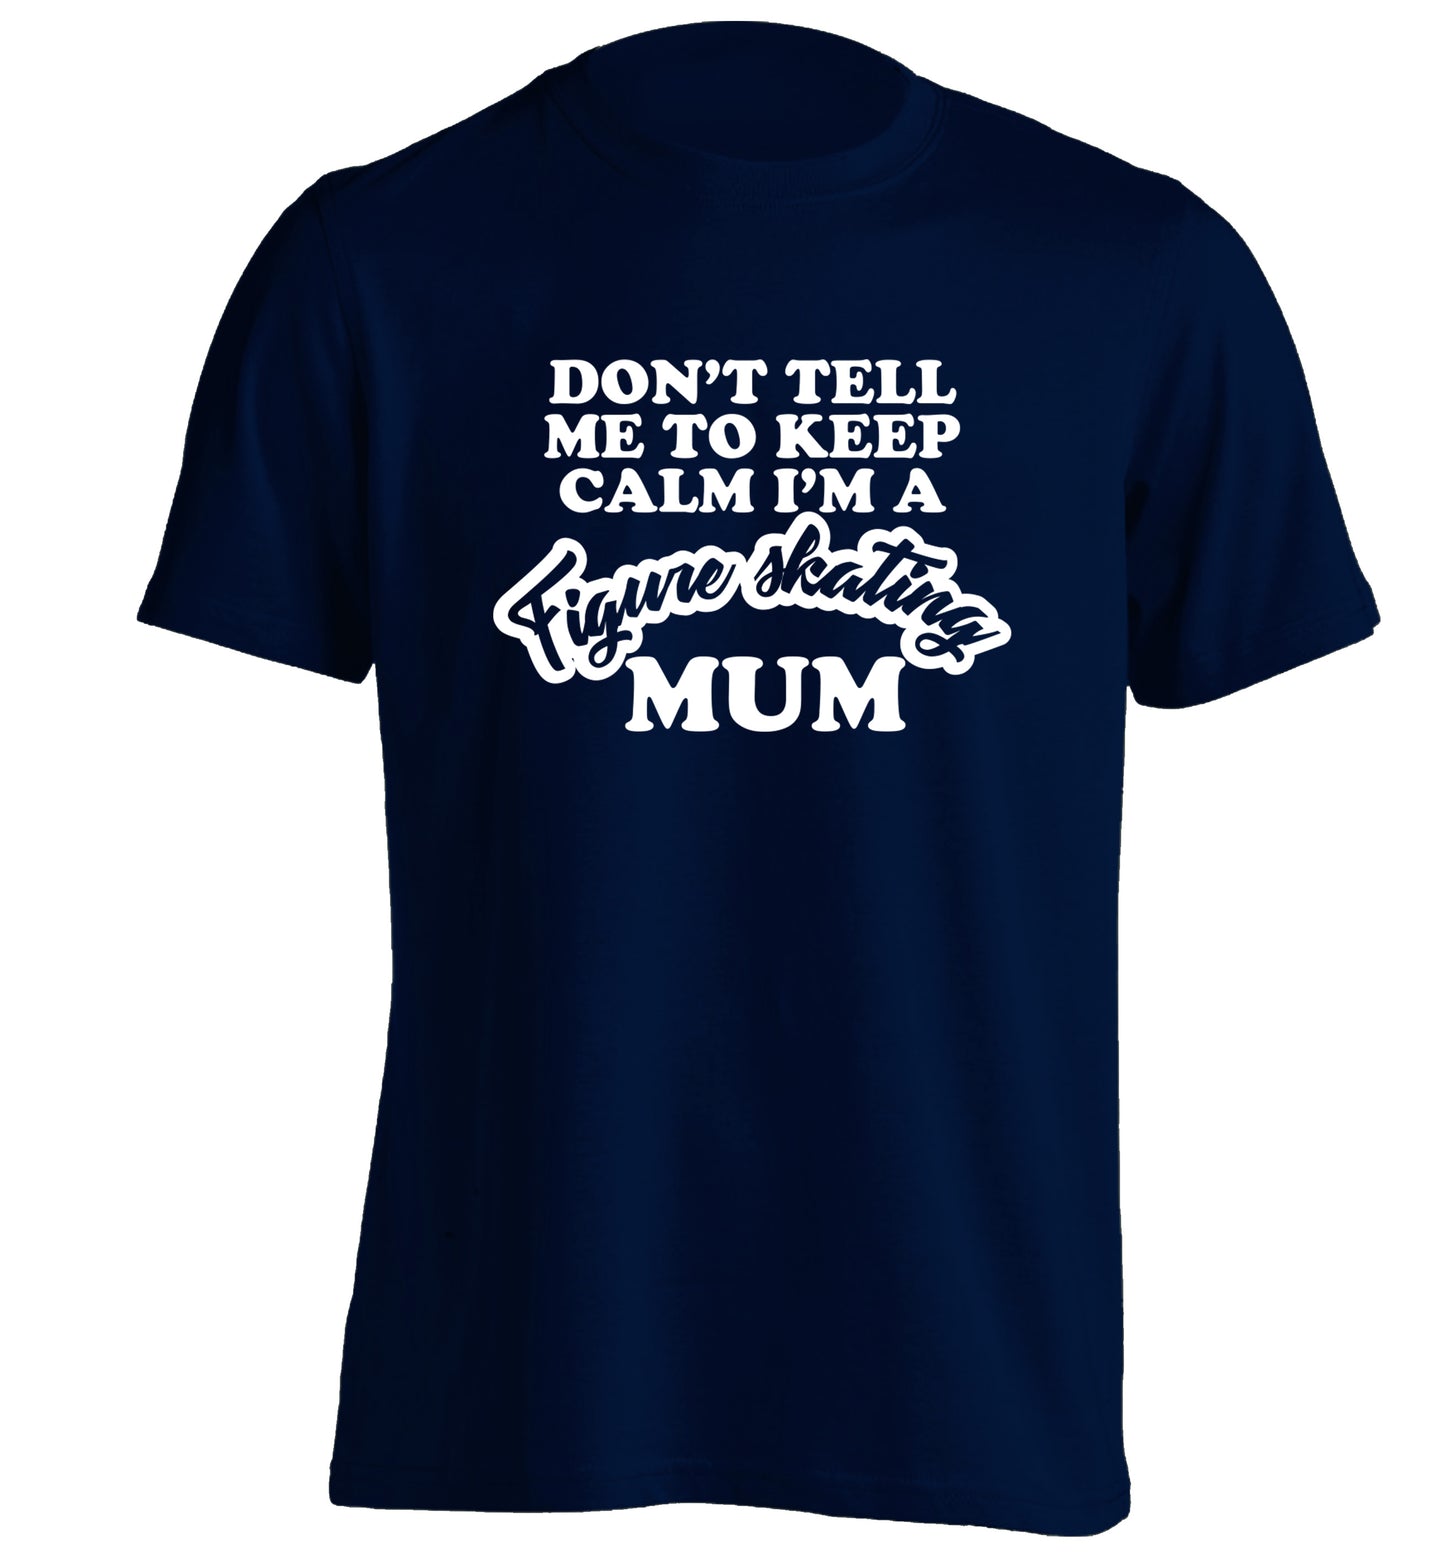 Don't tell me to keep calm I'm a figure skating mum adults unisexnavy Tshirt 2XL